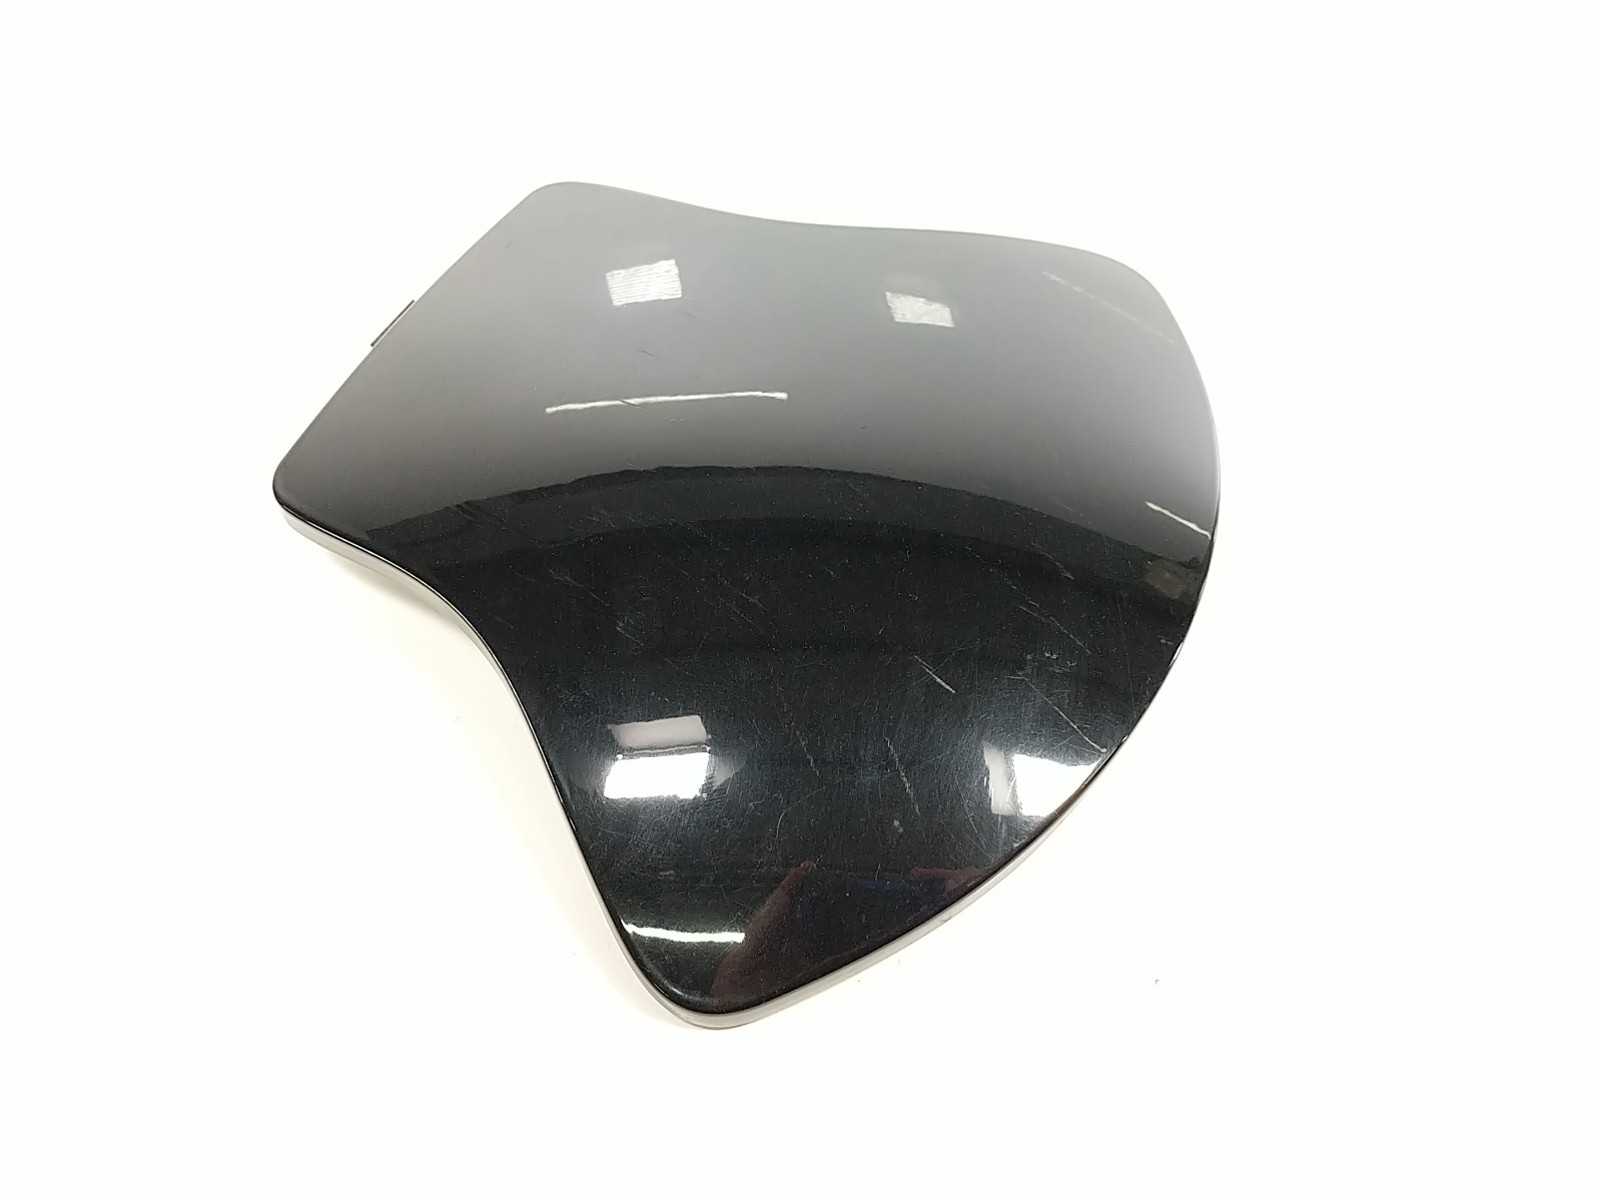 02 BMW K1200LT Black Front Inner Dash Cover Plastic Storage Tray Cover